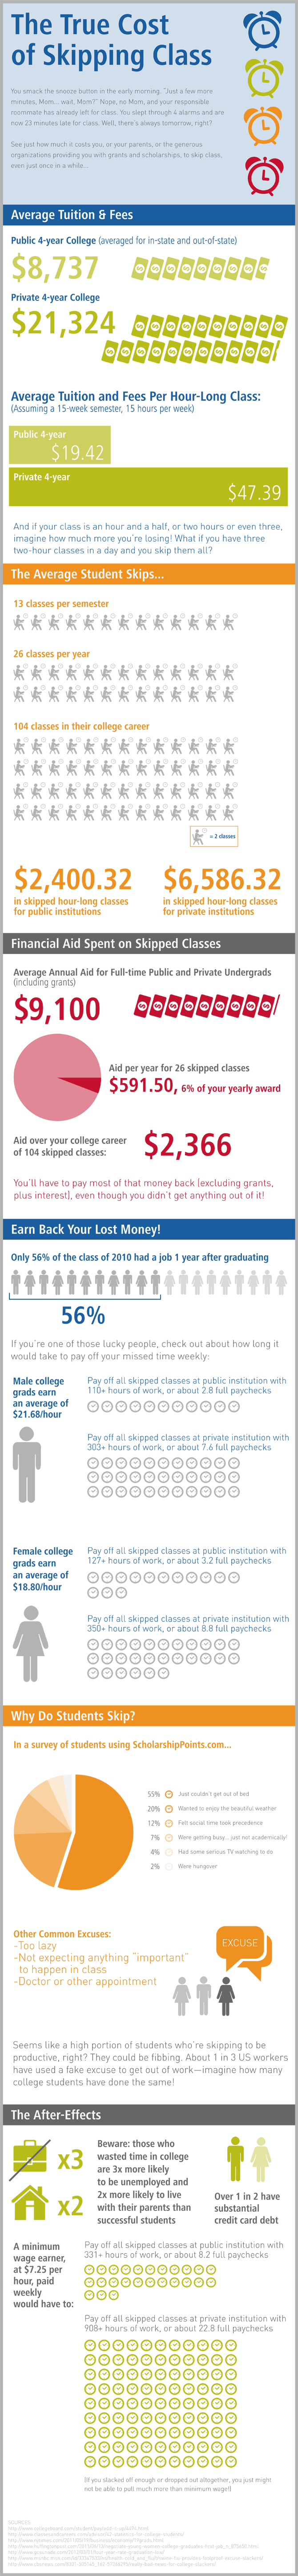 true cost of skipping class infographic